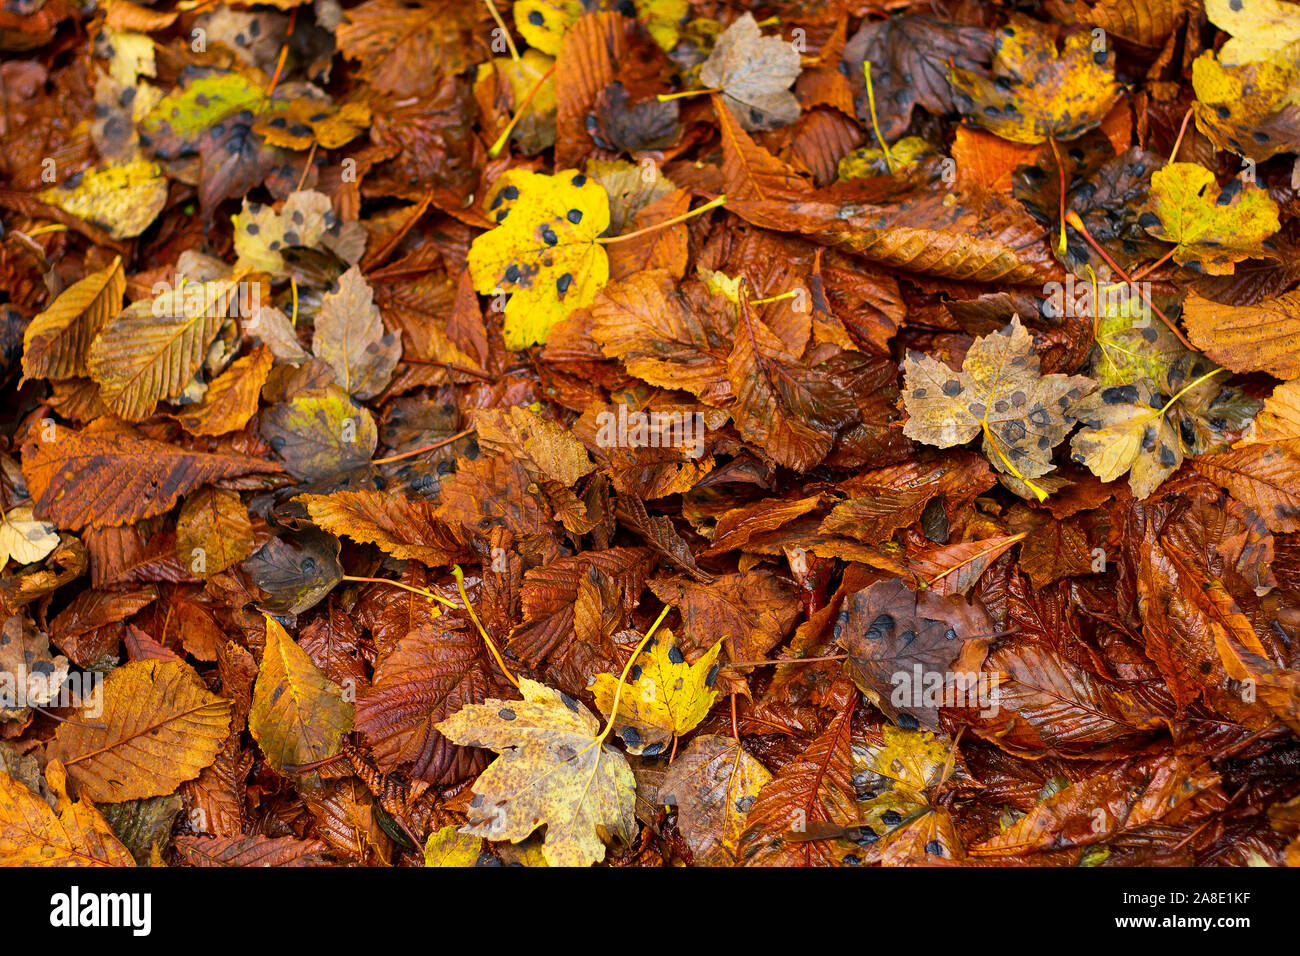 Decaying autumn leaves on the ground Stock Photo